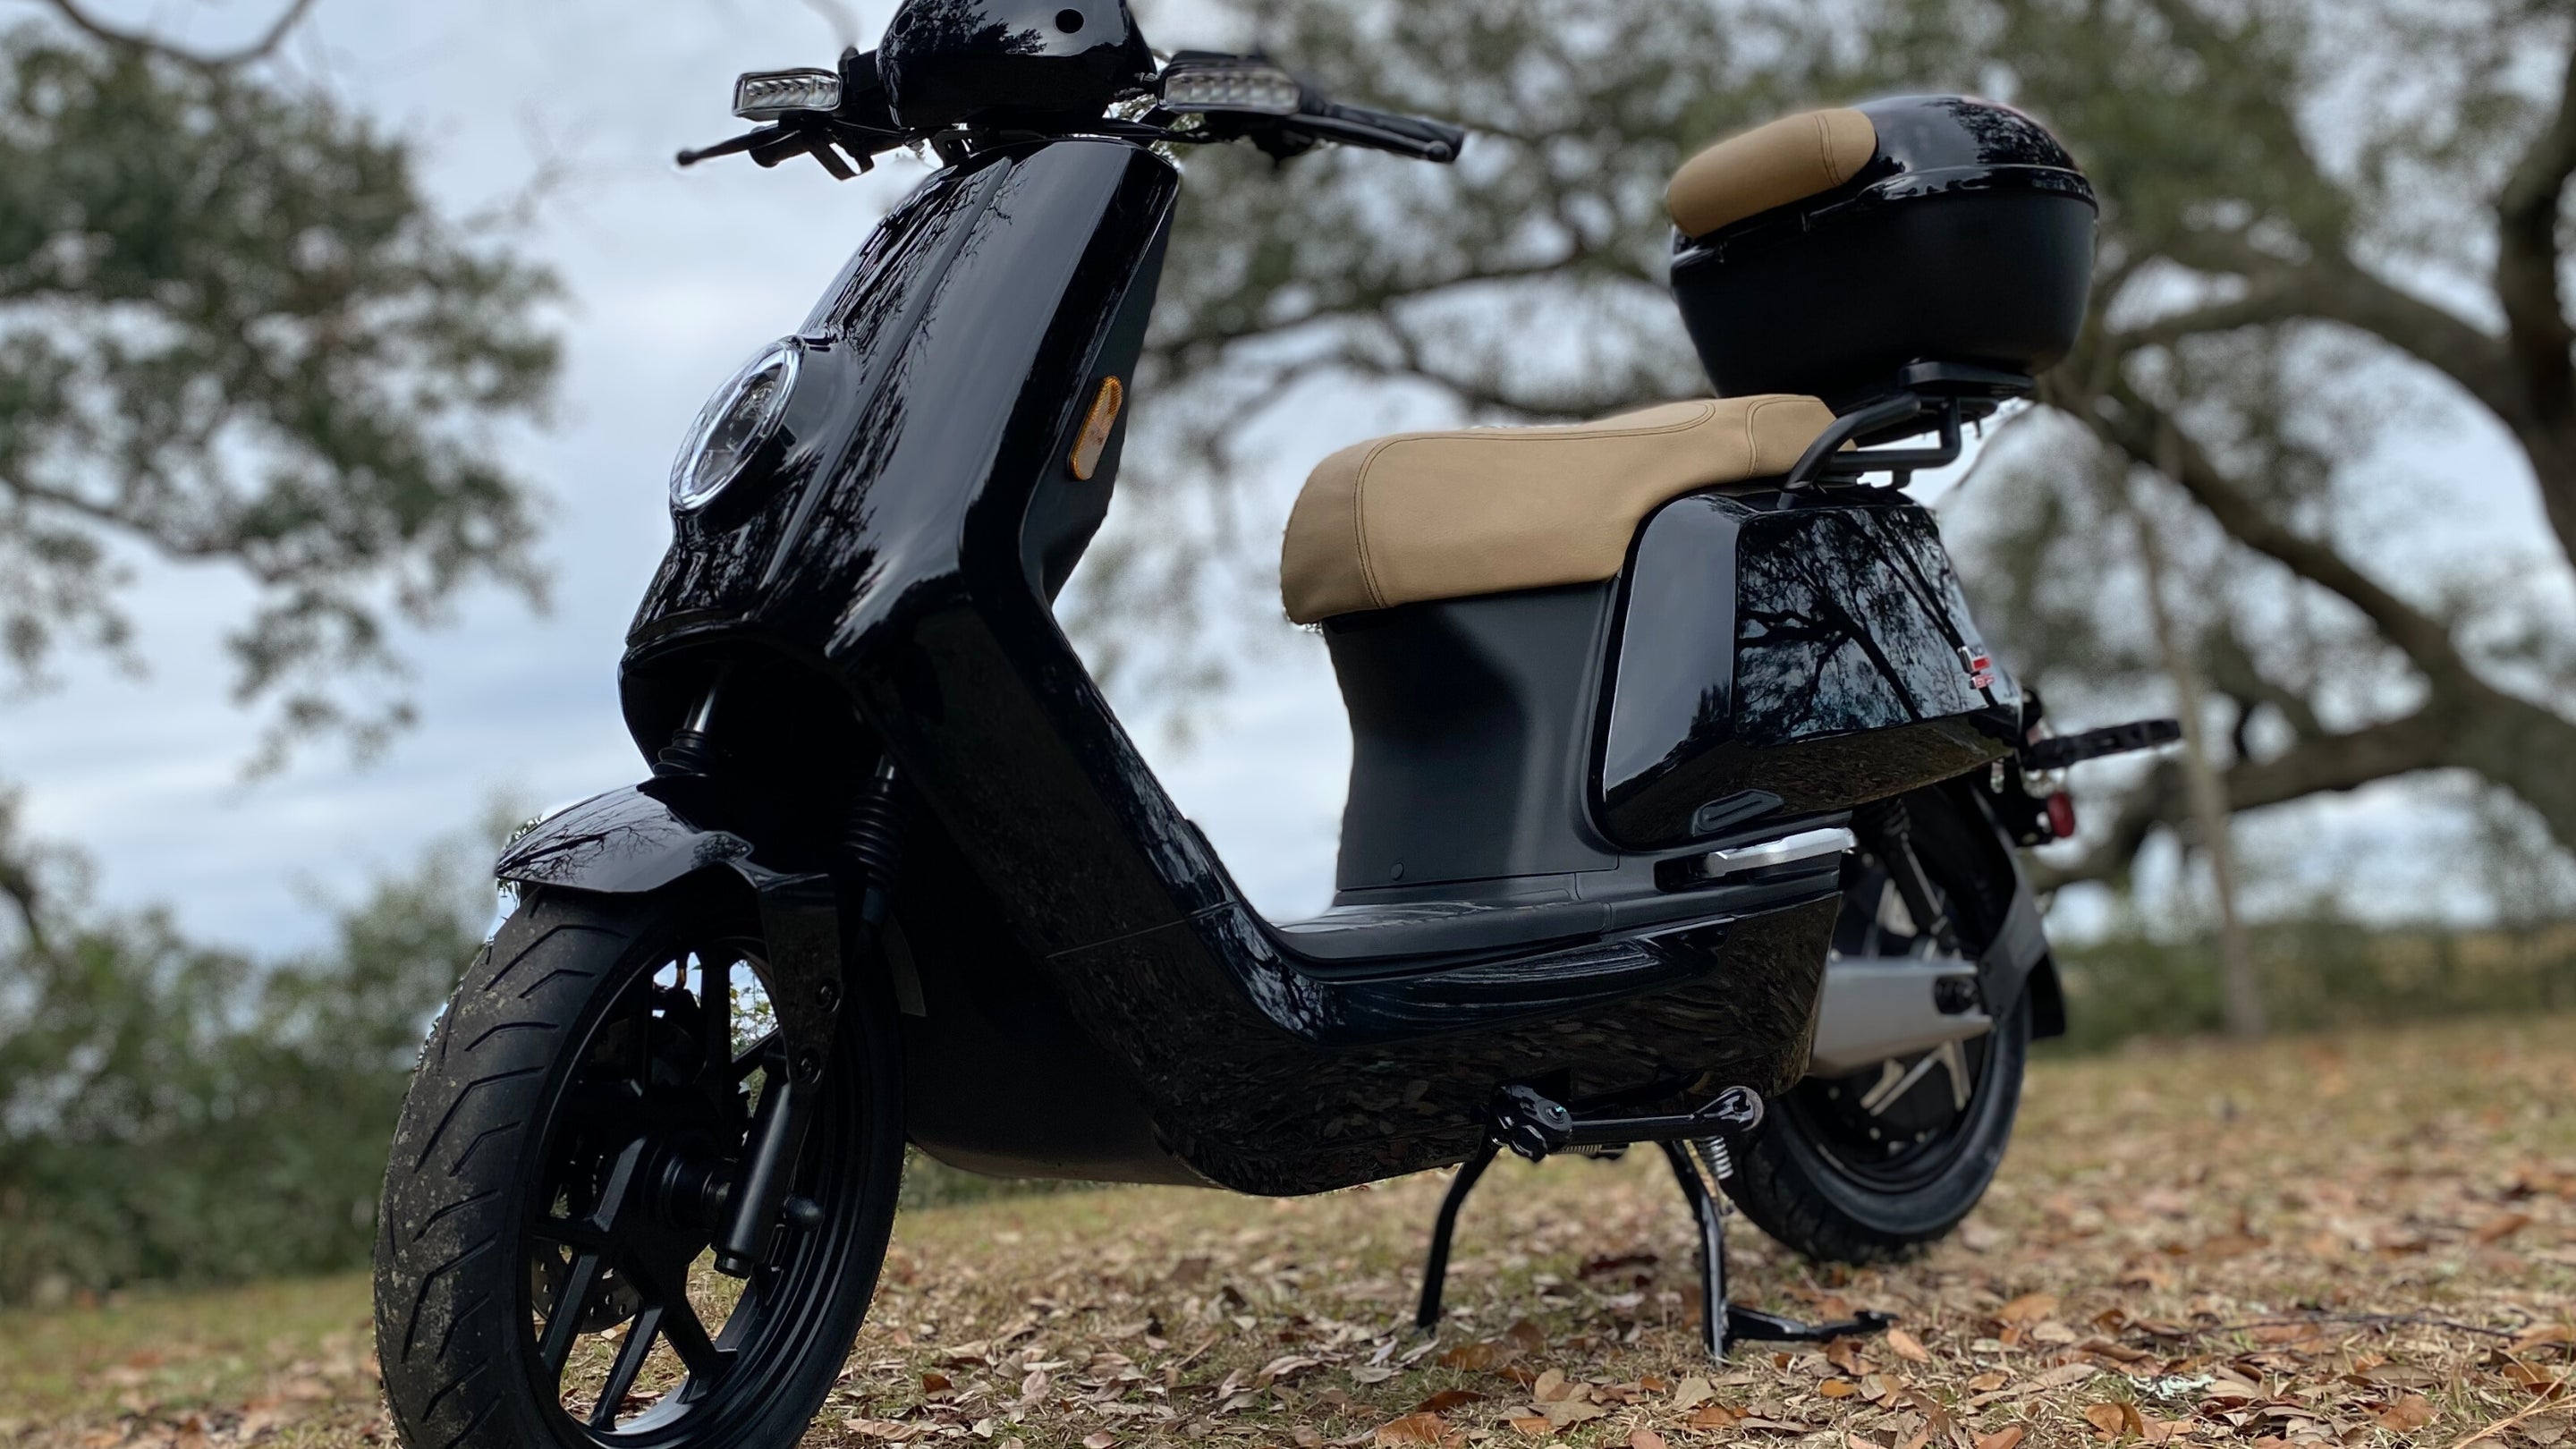 Scooter Gas and Electric Scooters For Sale | We Deliver – SCOOTERSTOP.com